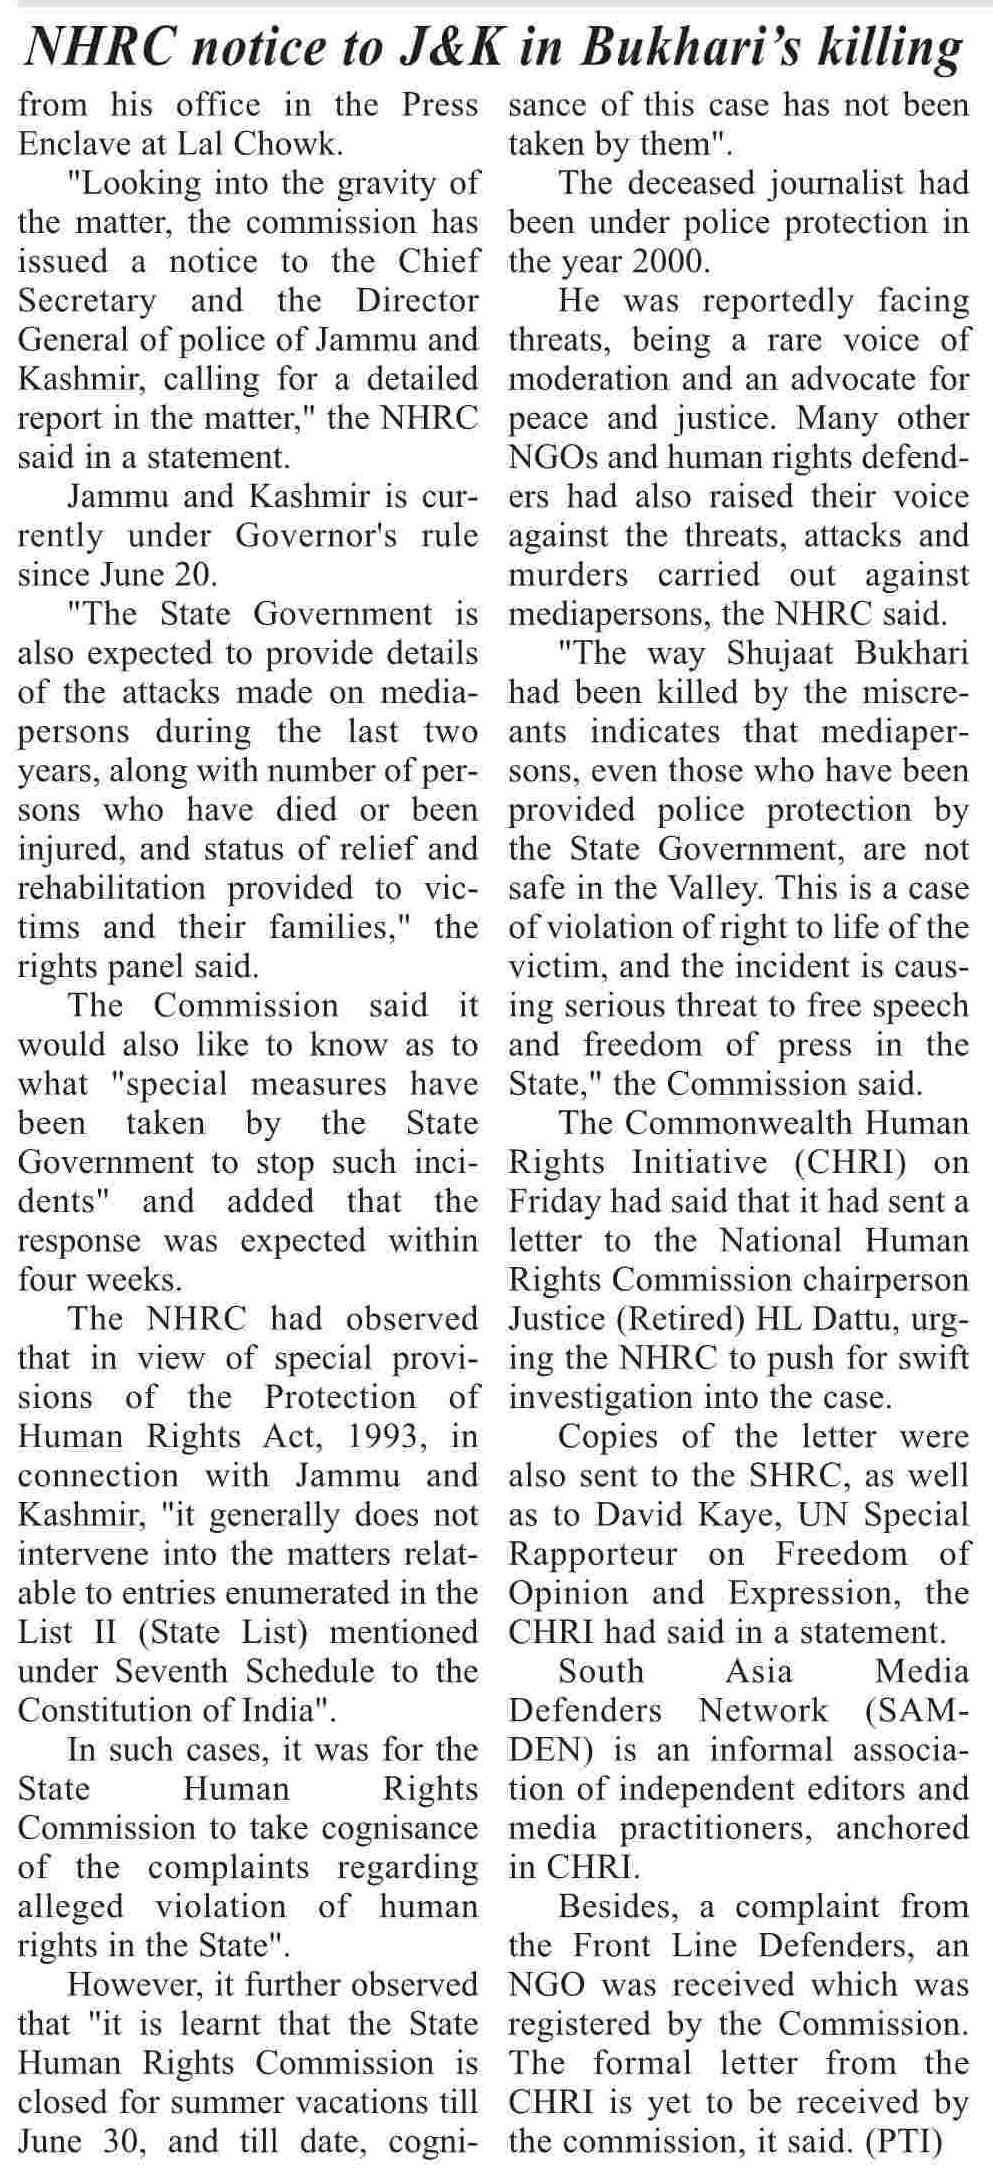 Daily Excelsior, Jammu Tuesday, 26th June 2018; Page: 1